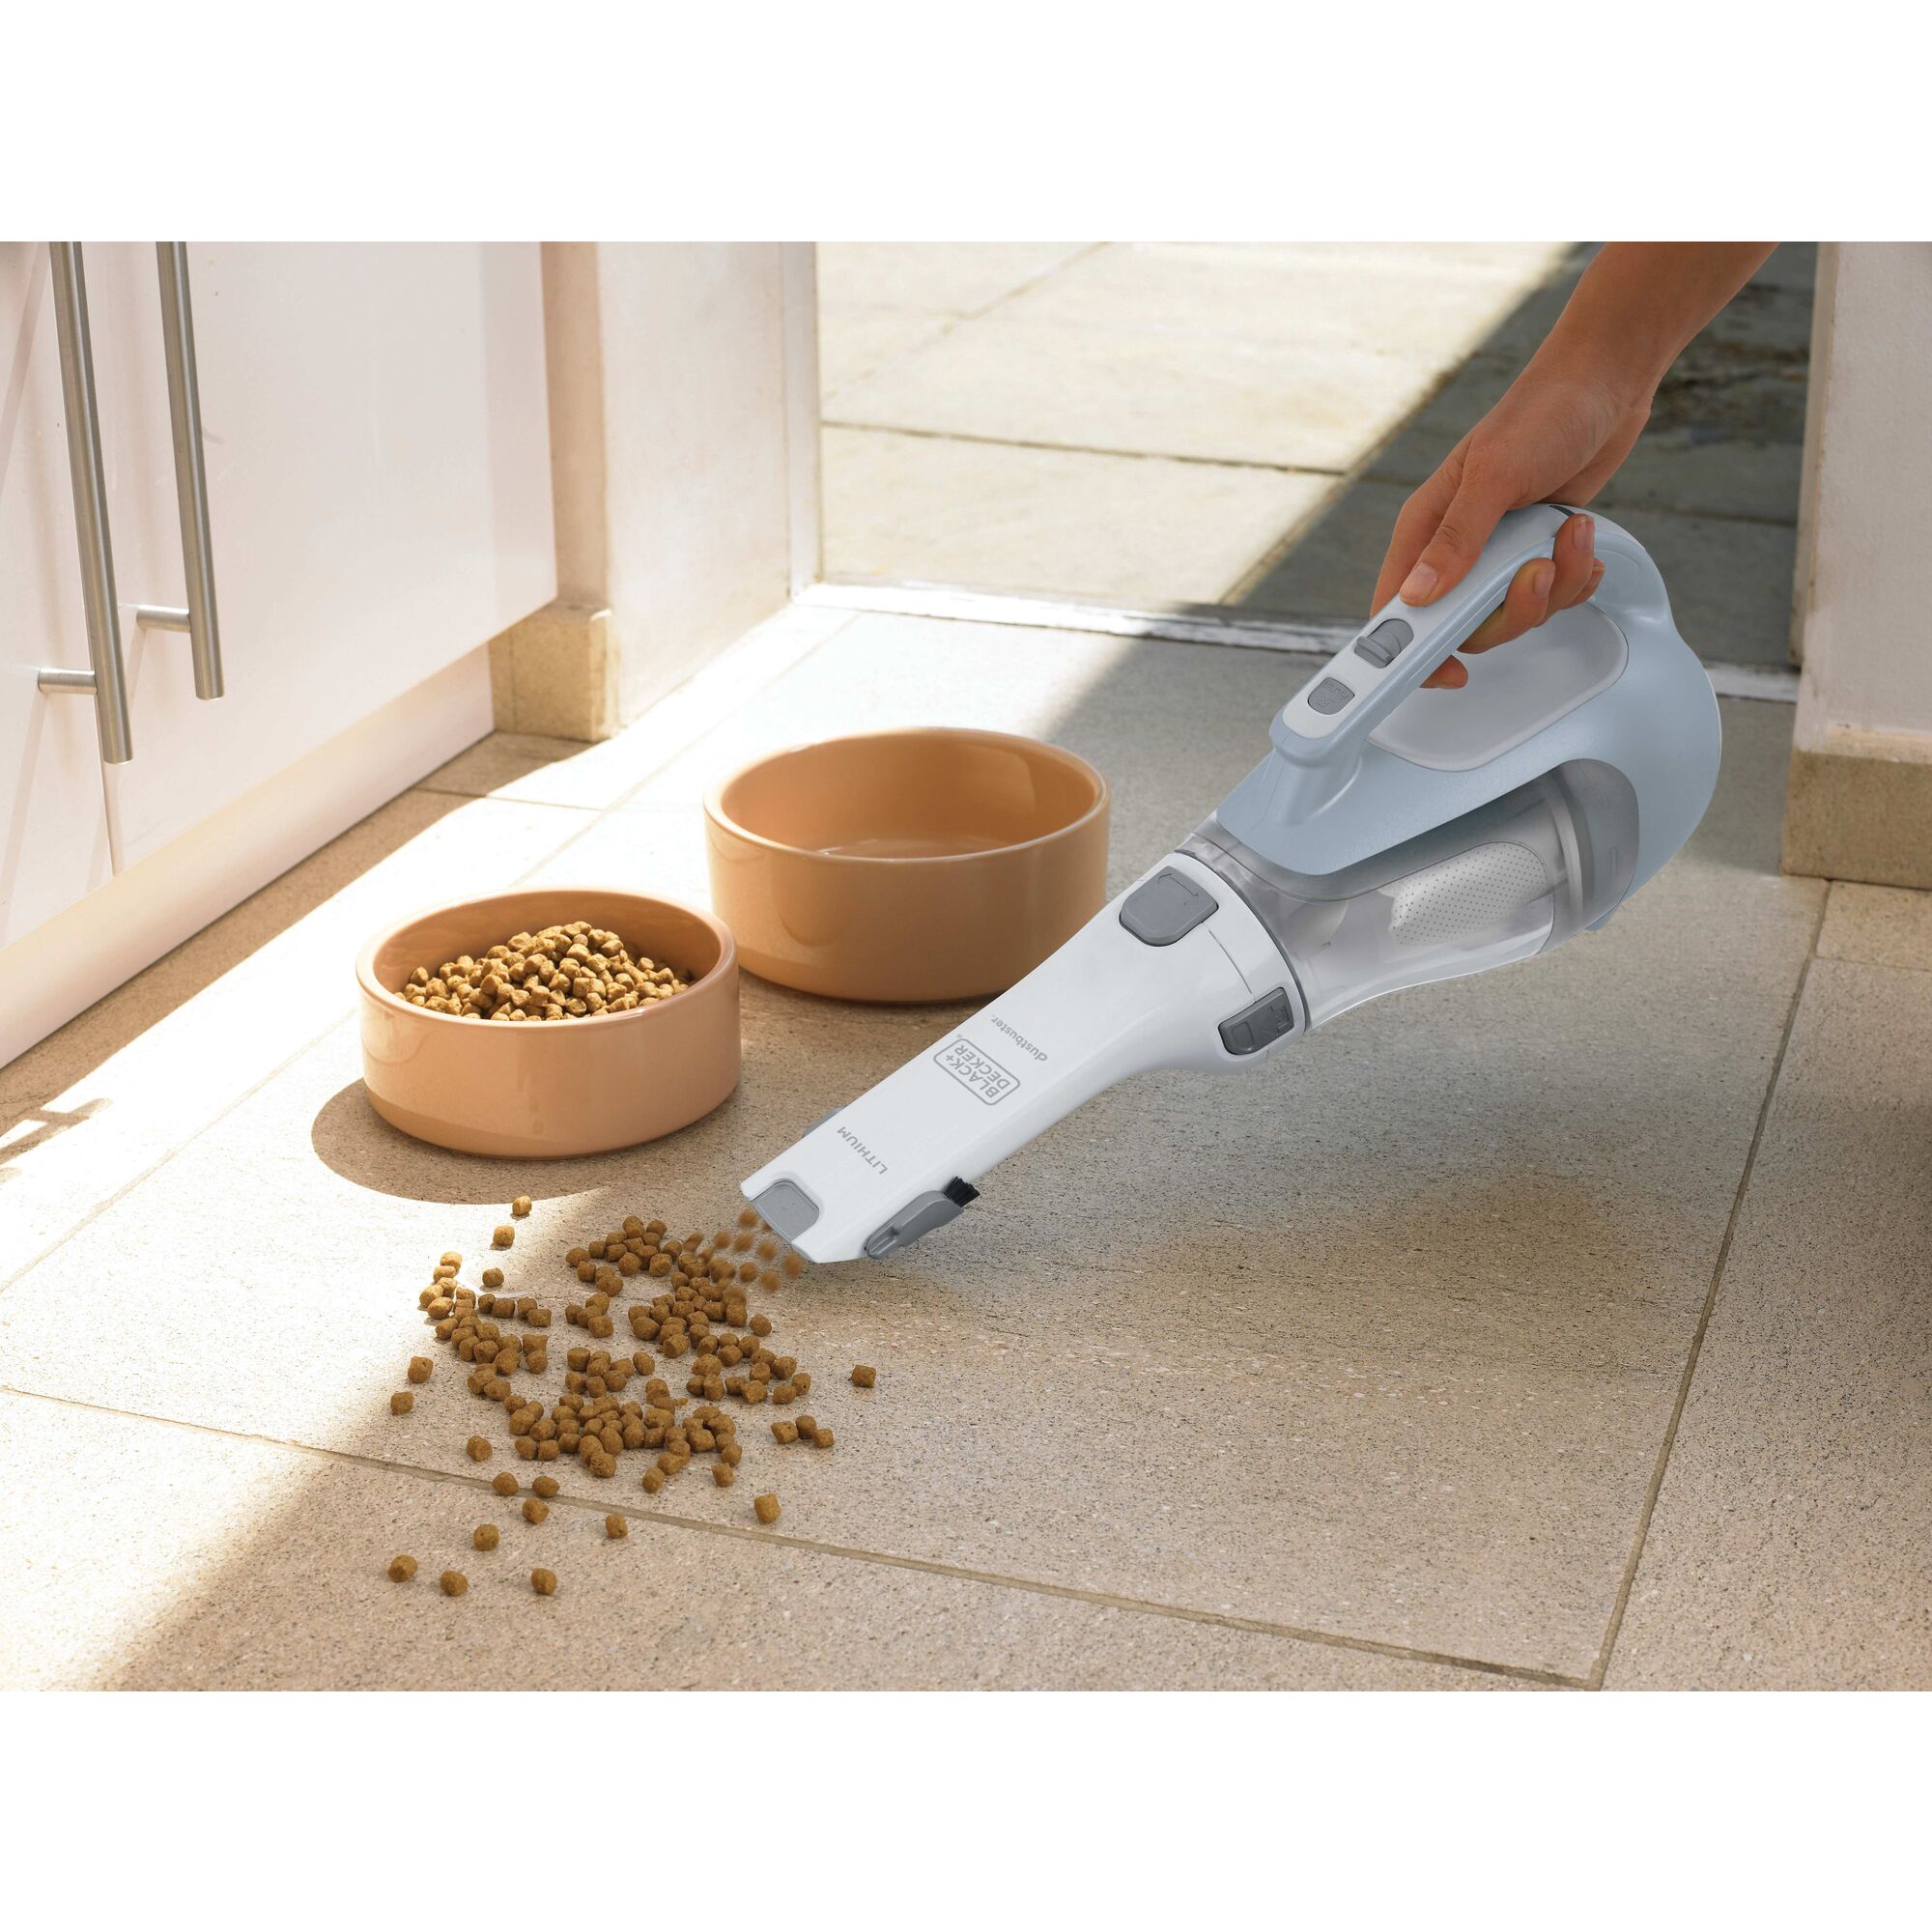 Dustbuster cordless hand vacuum being used by a person.